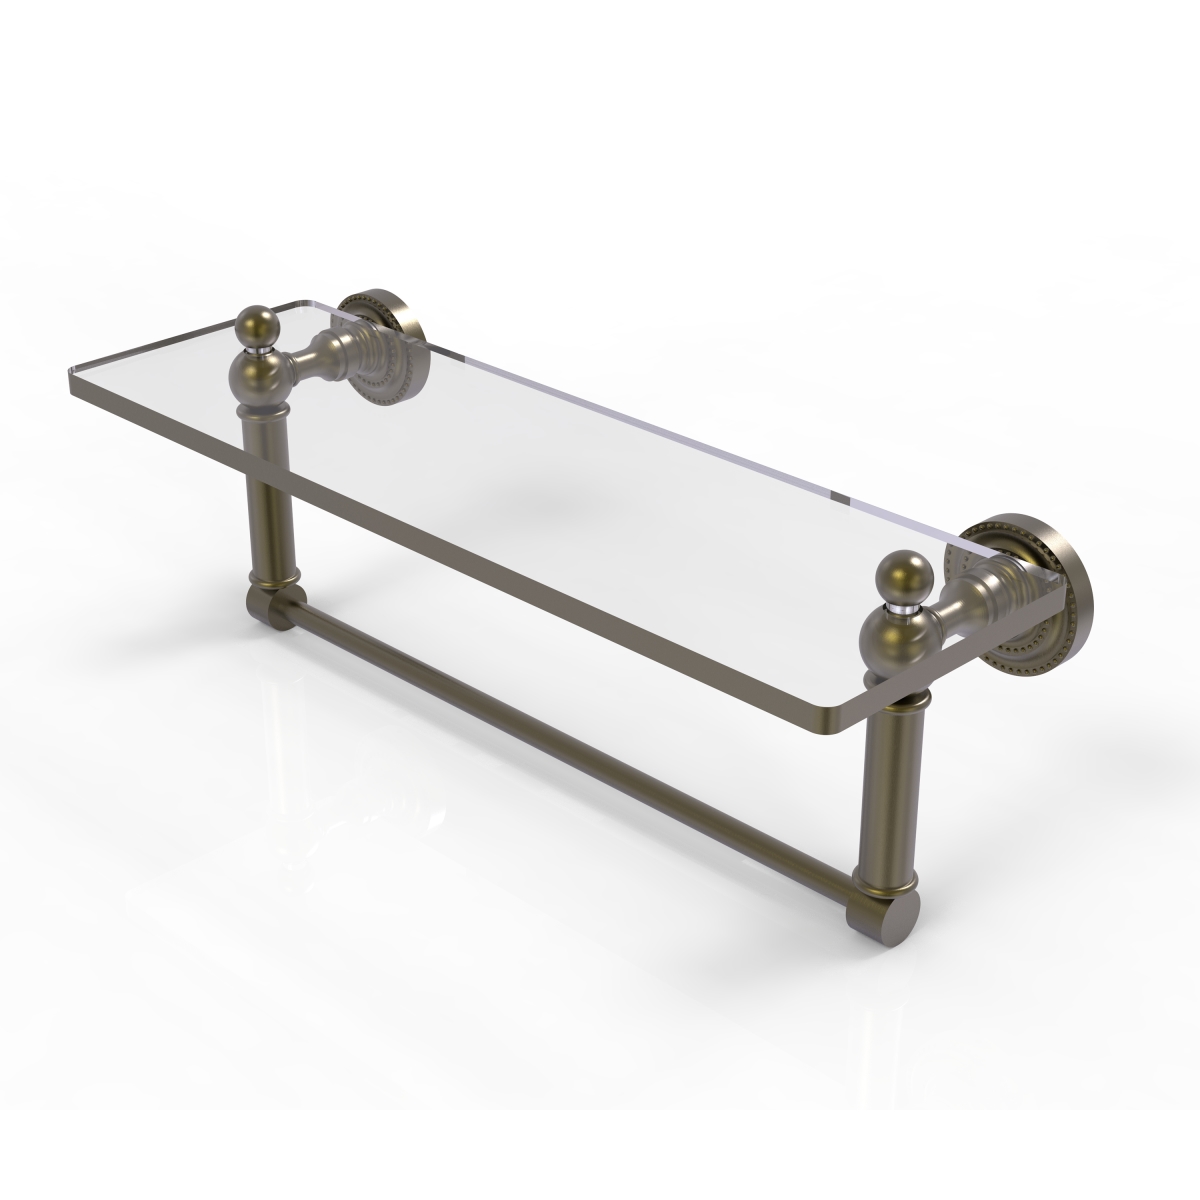 Picture of Allied Brass DT-1TB-16-ABR 16 in. Dottingham Glass Vanity Shelf with Integrated Towel Bar, Antique Brass